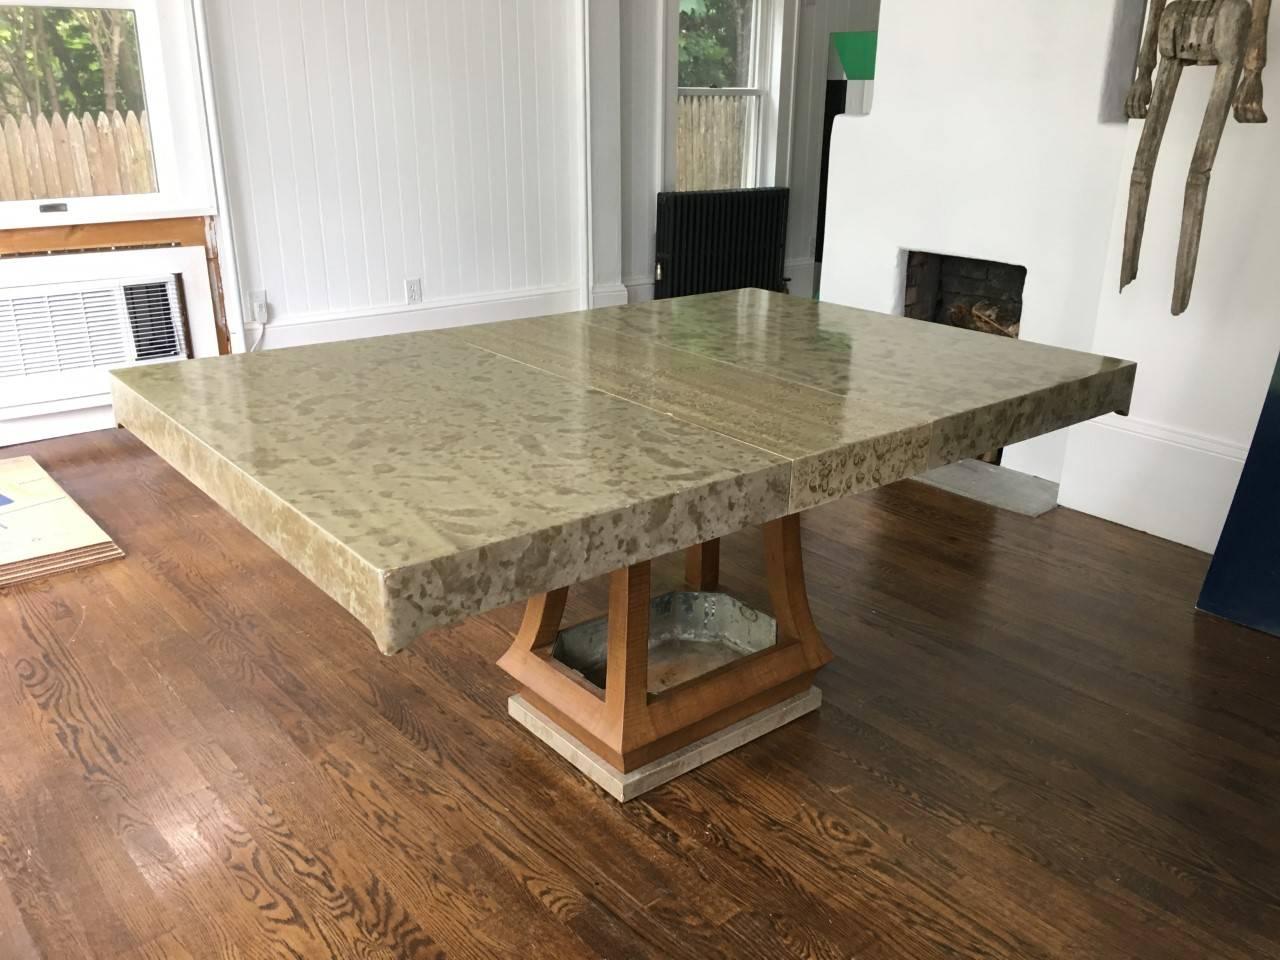 Unique James Mont custom designed extension dining table in the Asian style.
Lacquered tabletop and tiger maple base concealing a tin removable tray (for plants or liquor).

New York, 1960s.
Measures: Table extends to 60" long.